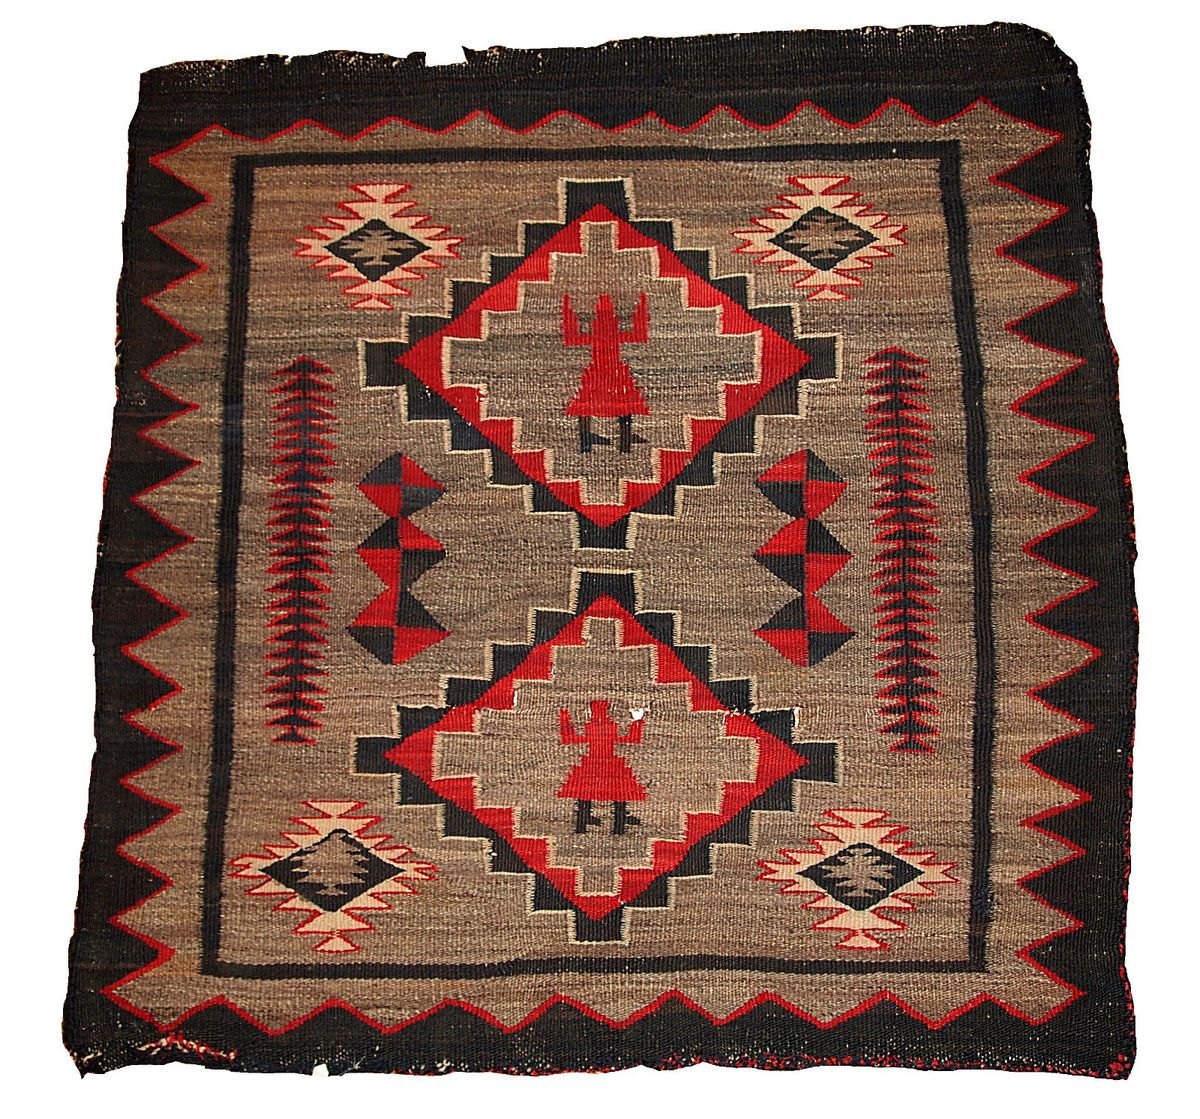 Hand Made Square American Indian Navajo Rug Blanket 3 10 x 3 10 1870 